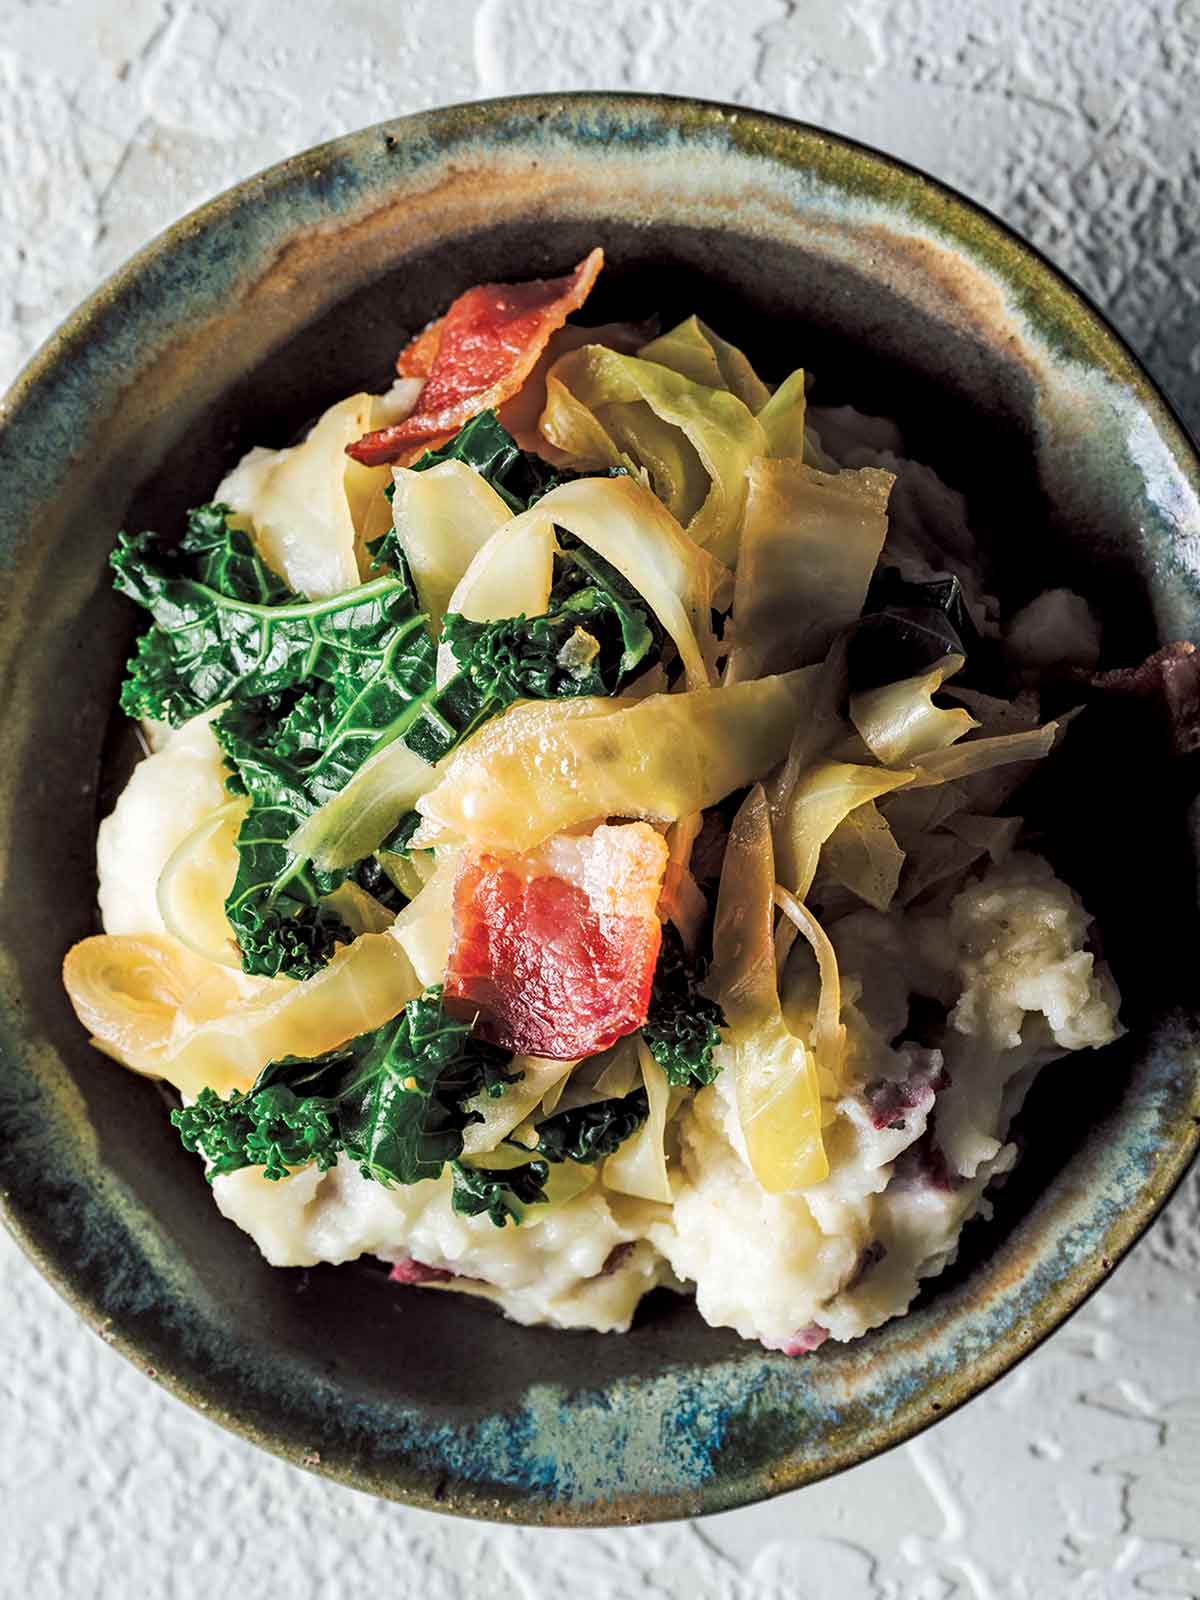 A ceramic bowl filled with Colcannon - an Irish dish made with mashed potatoes, cabbage, kale and bacon.